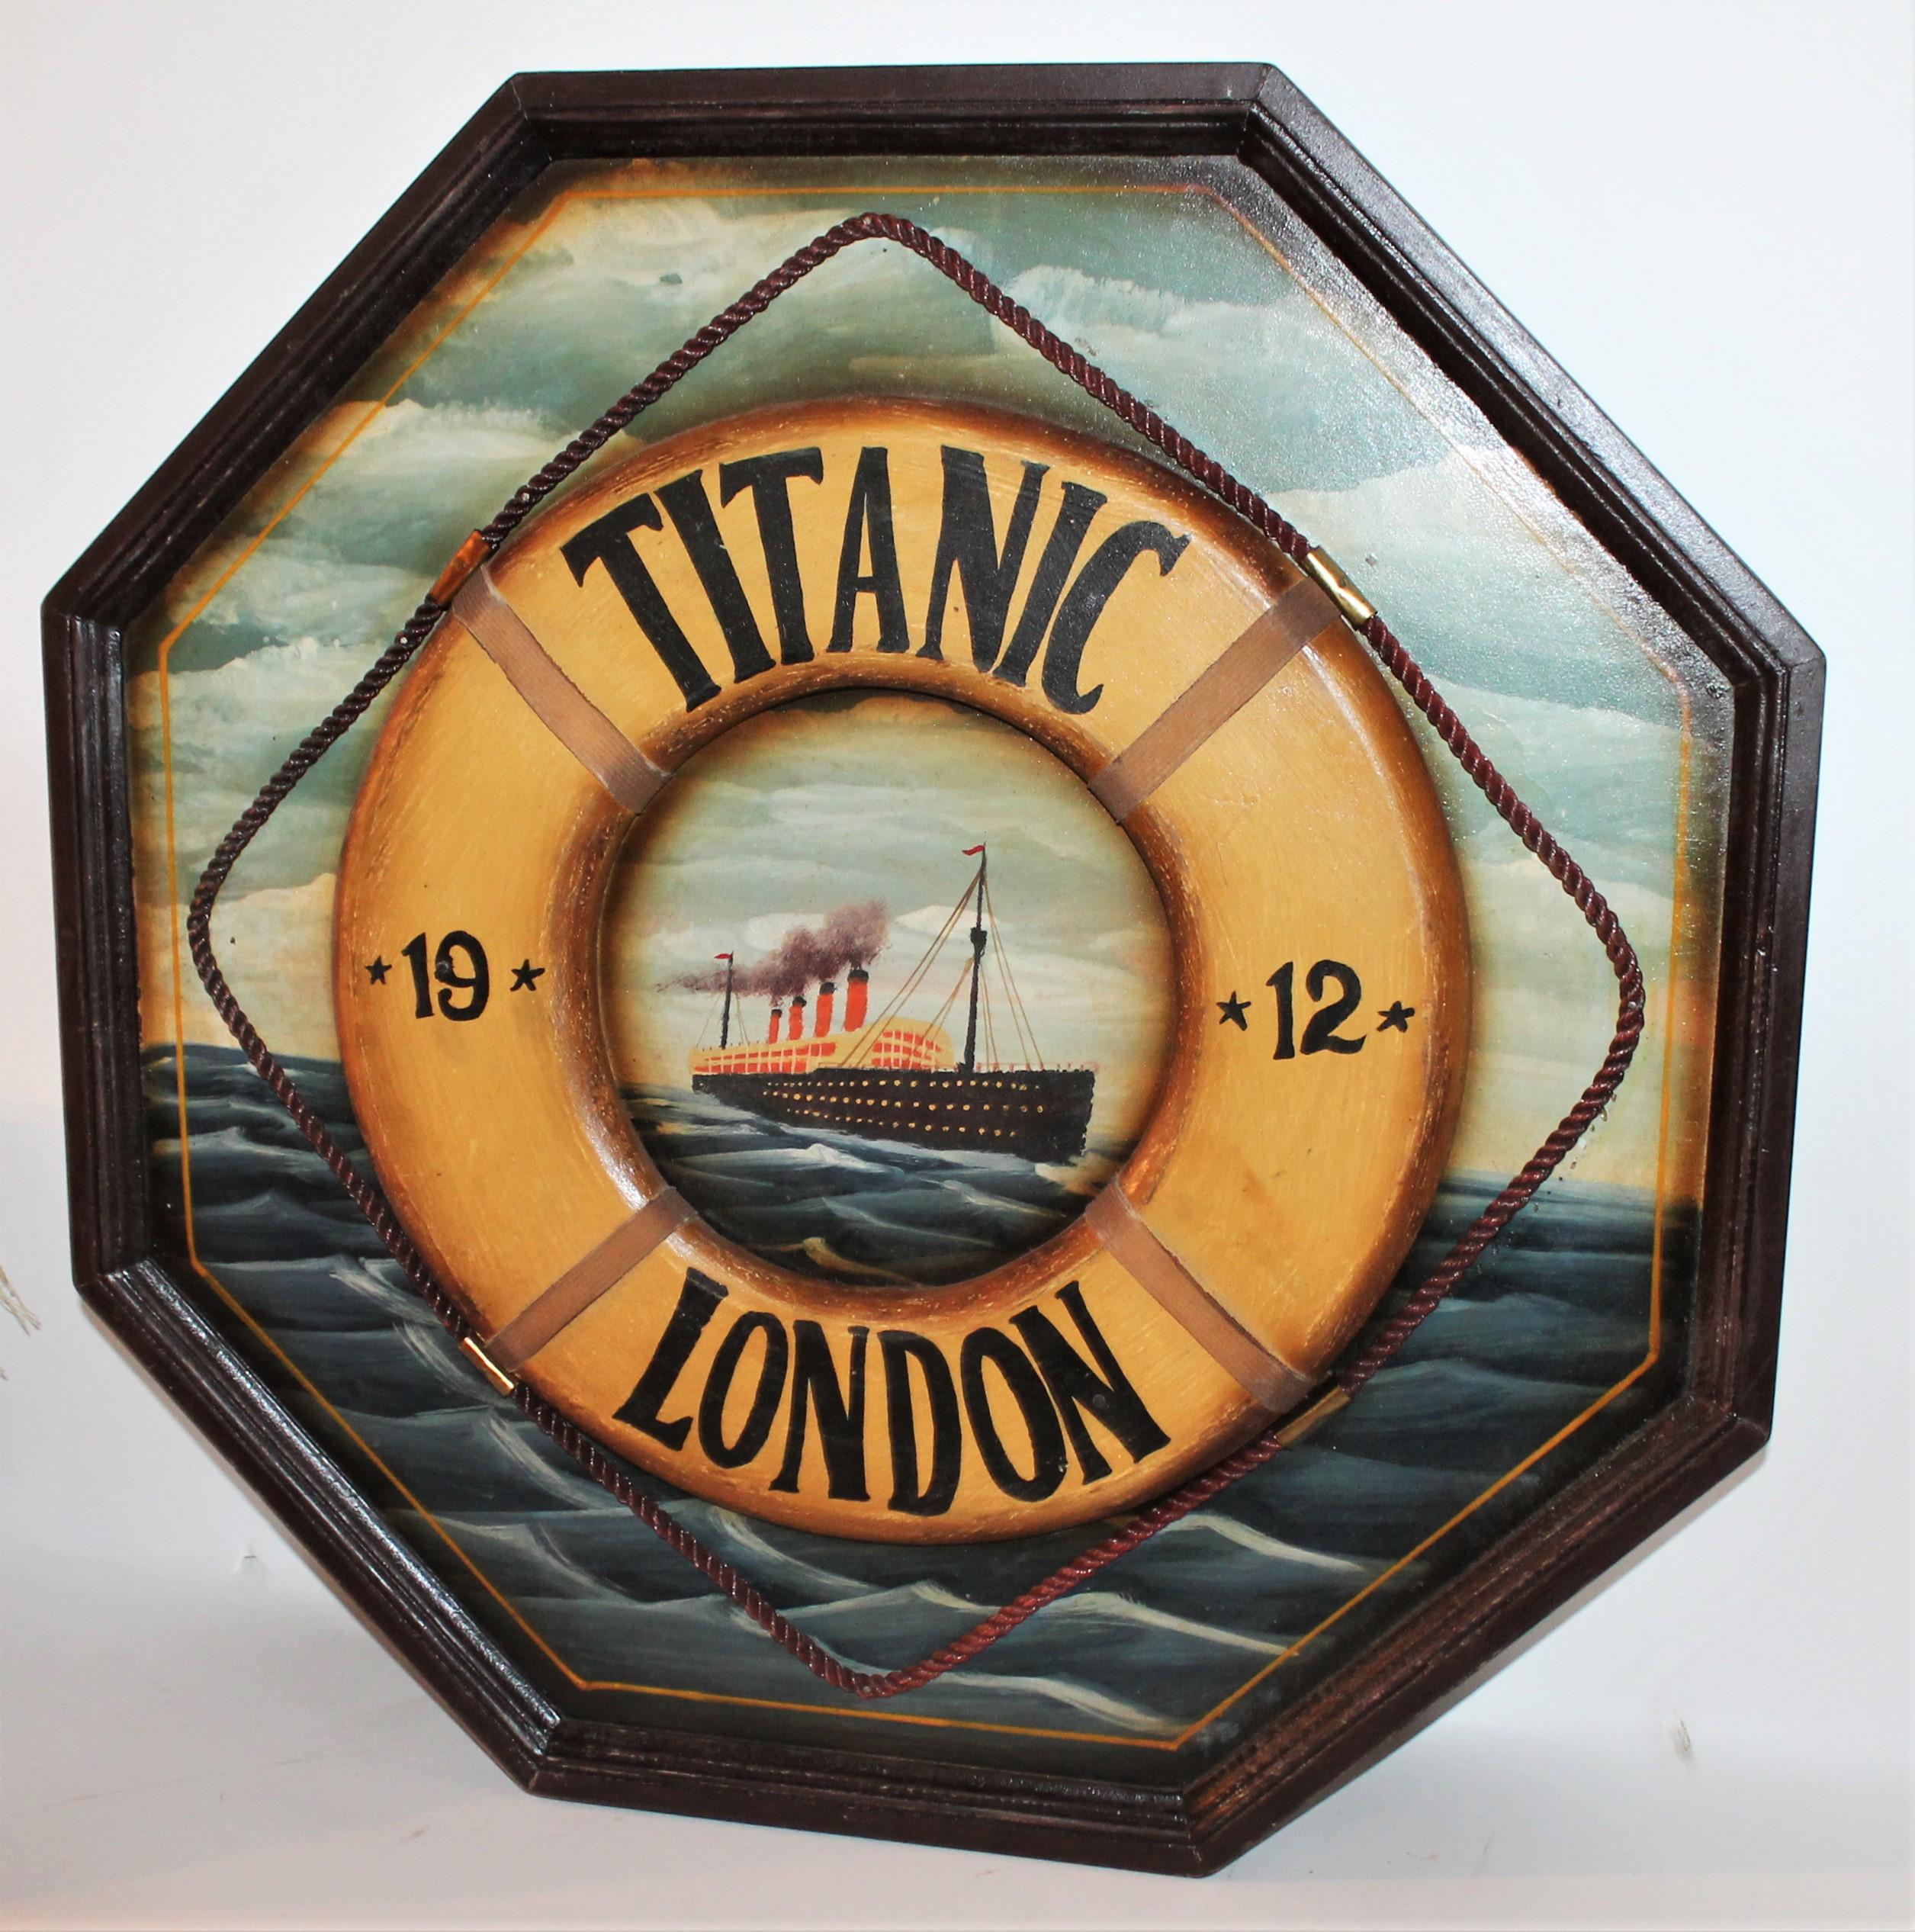 This handmade and painted Titanic trade sign is in good condition with wear on trim and small scratches throughout. This is a remake of the 19th century style trade signs. It reads 